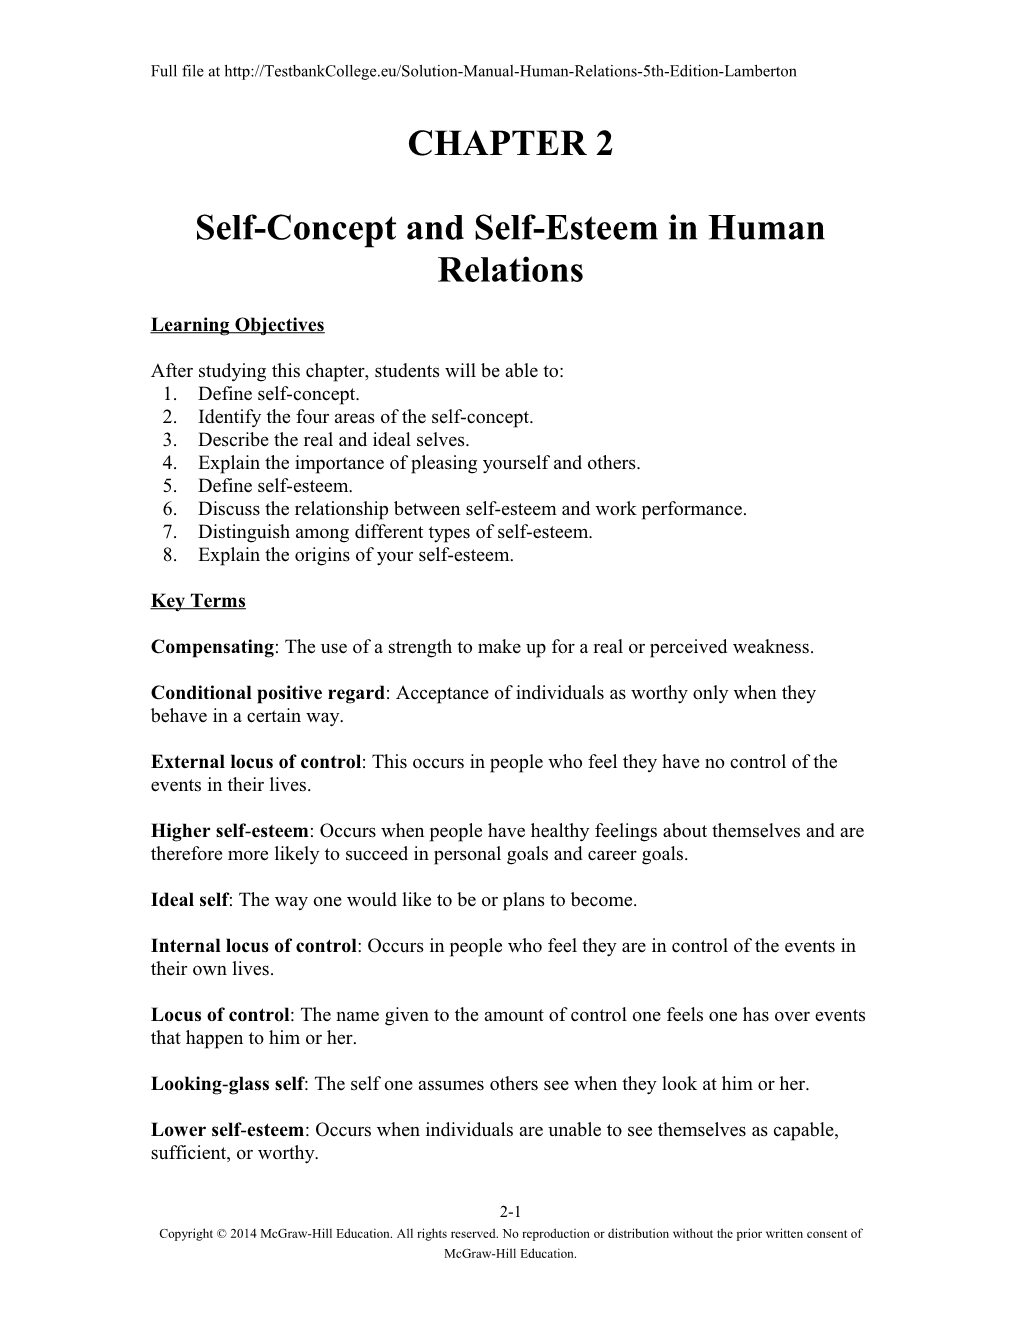 Self-Concept and Self-Esteem in Human Relations